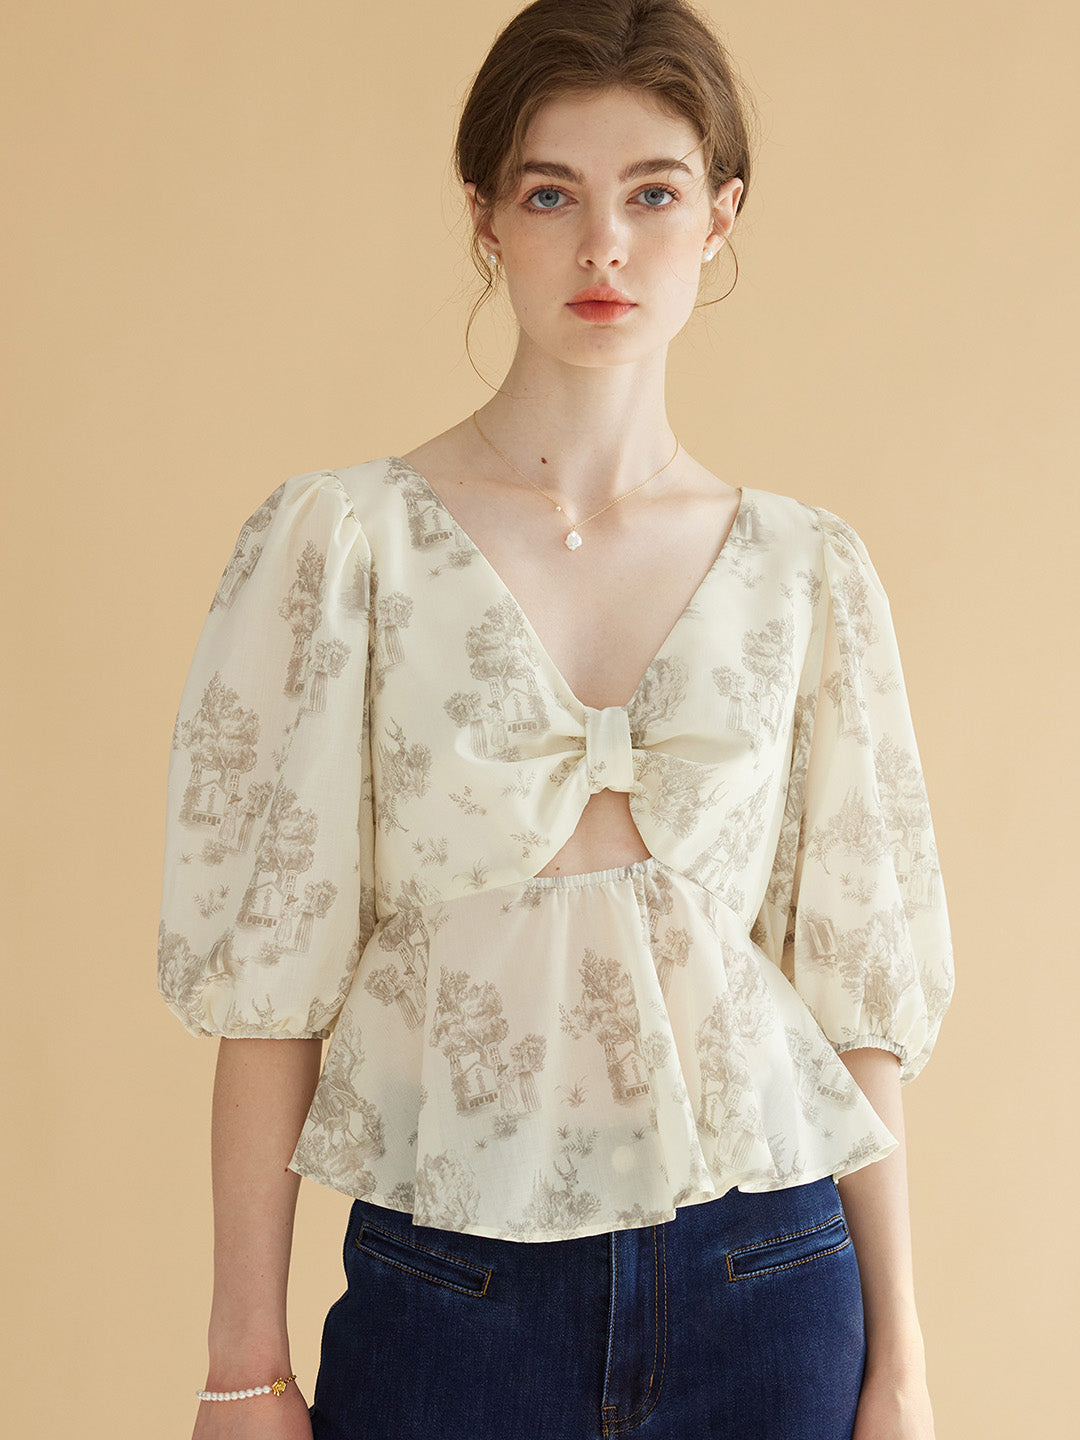 【Final Sale】Malayah Rose Print Knotted Cutout Top